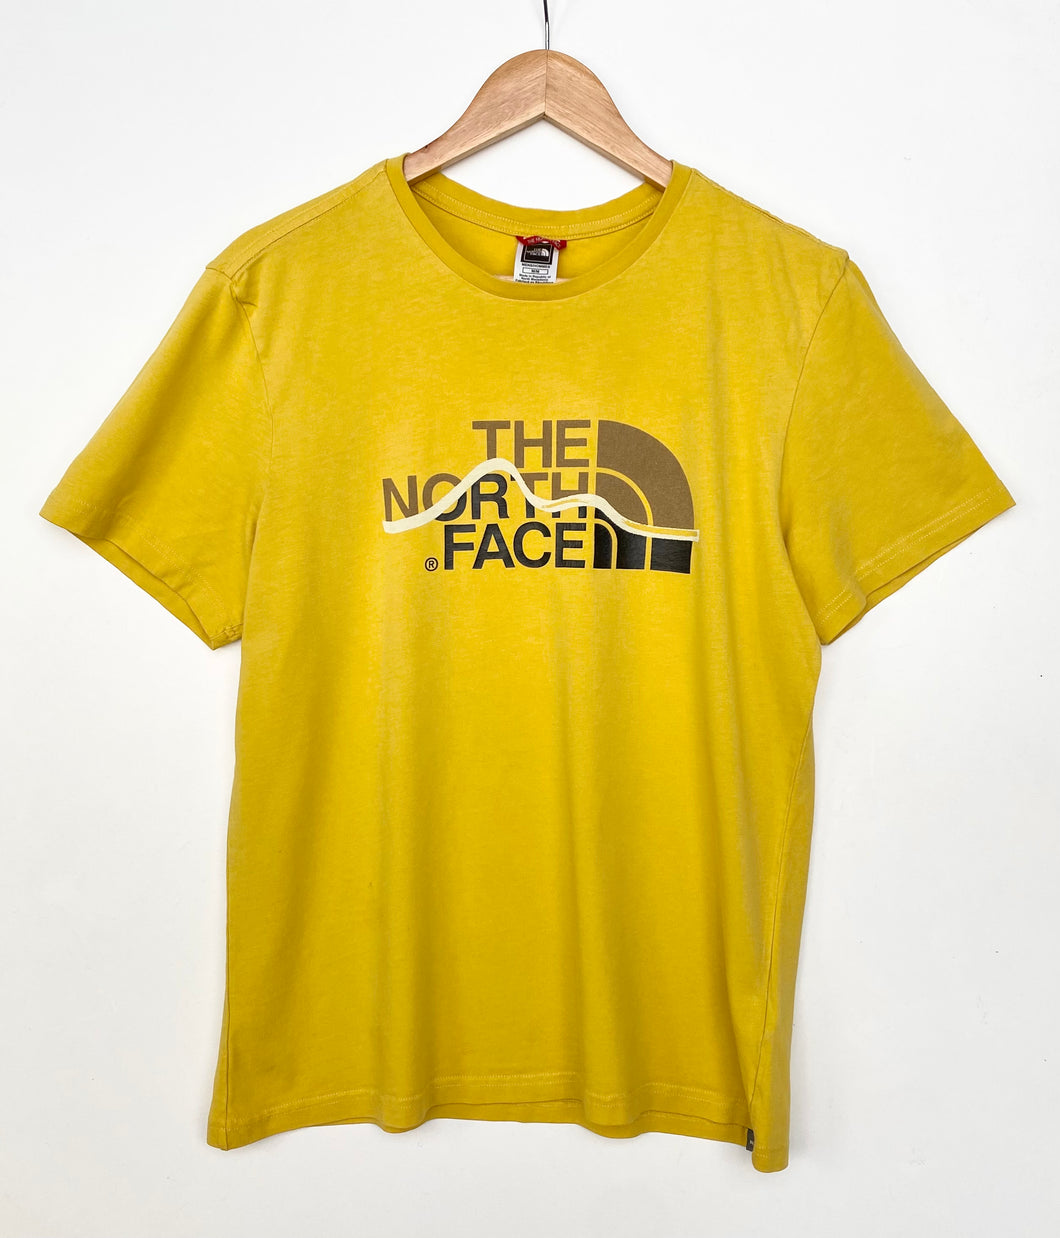 The North Face T-shirt (M)